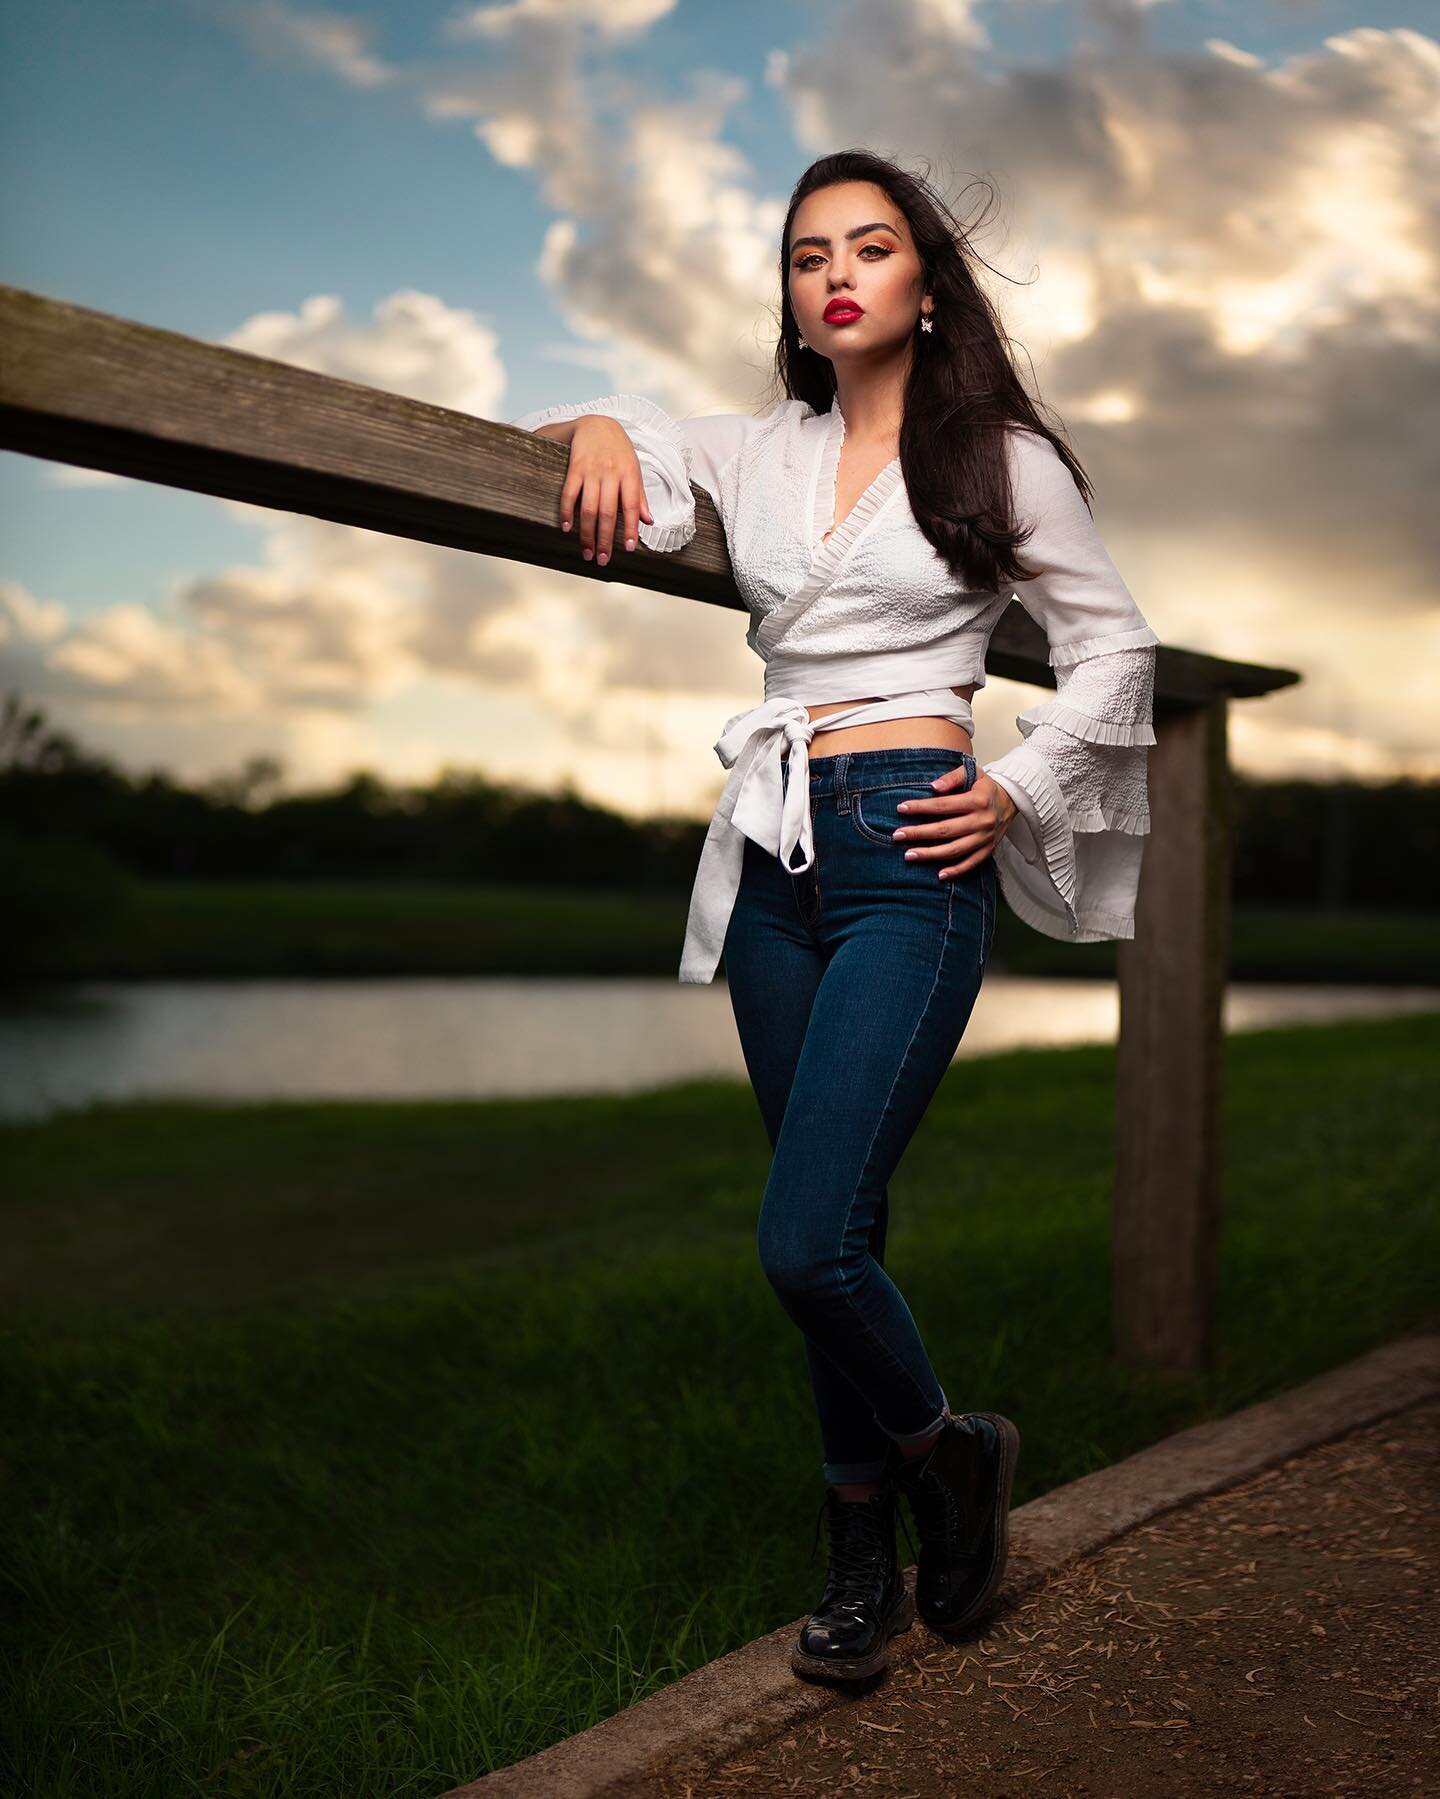 Anyone else a huge fan of clouds? That's the one thing I look for in a location to add some spice to my images when there's not much to work with, haha.😄
..
This shoot had a lot of things that challenged me; it was hot &amp; SO humid, there were a l